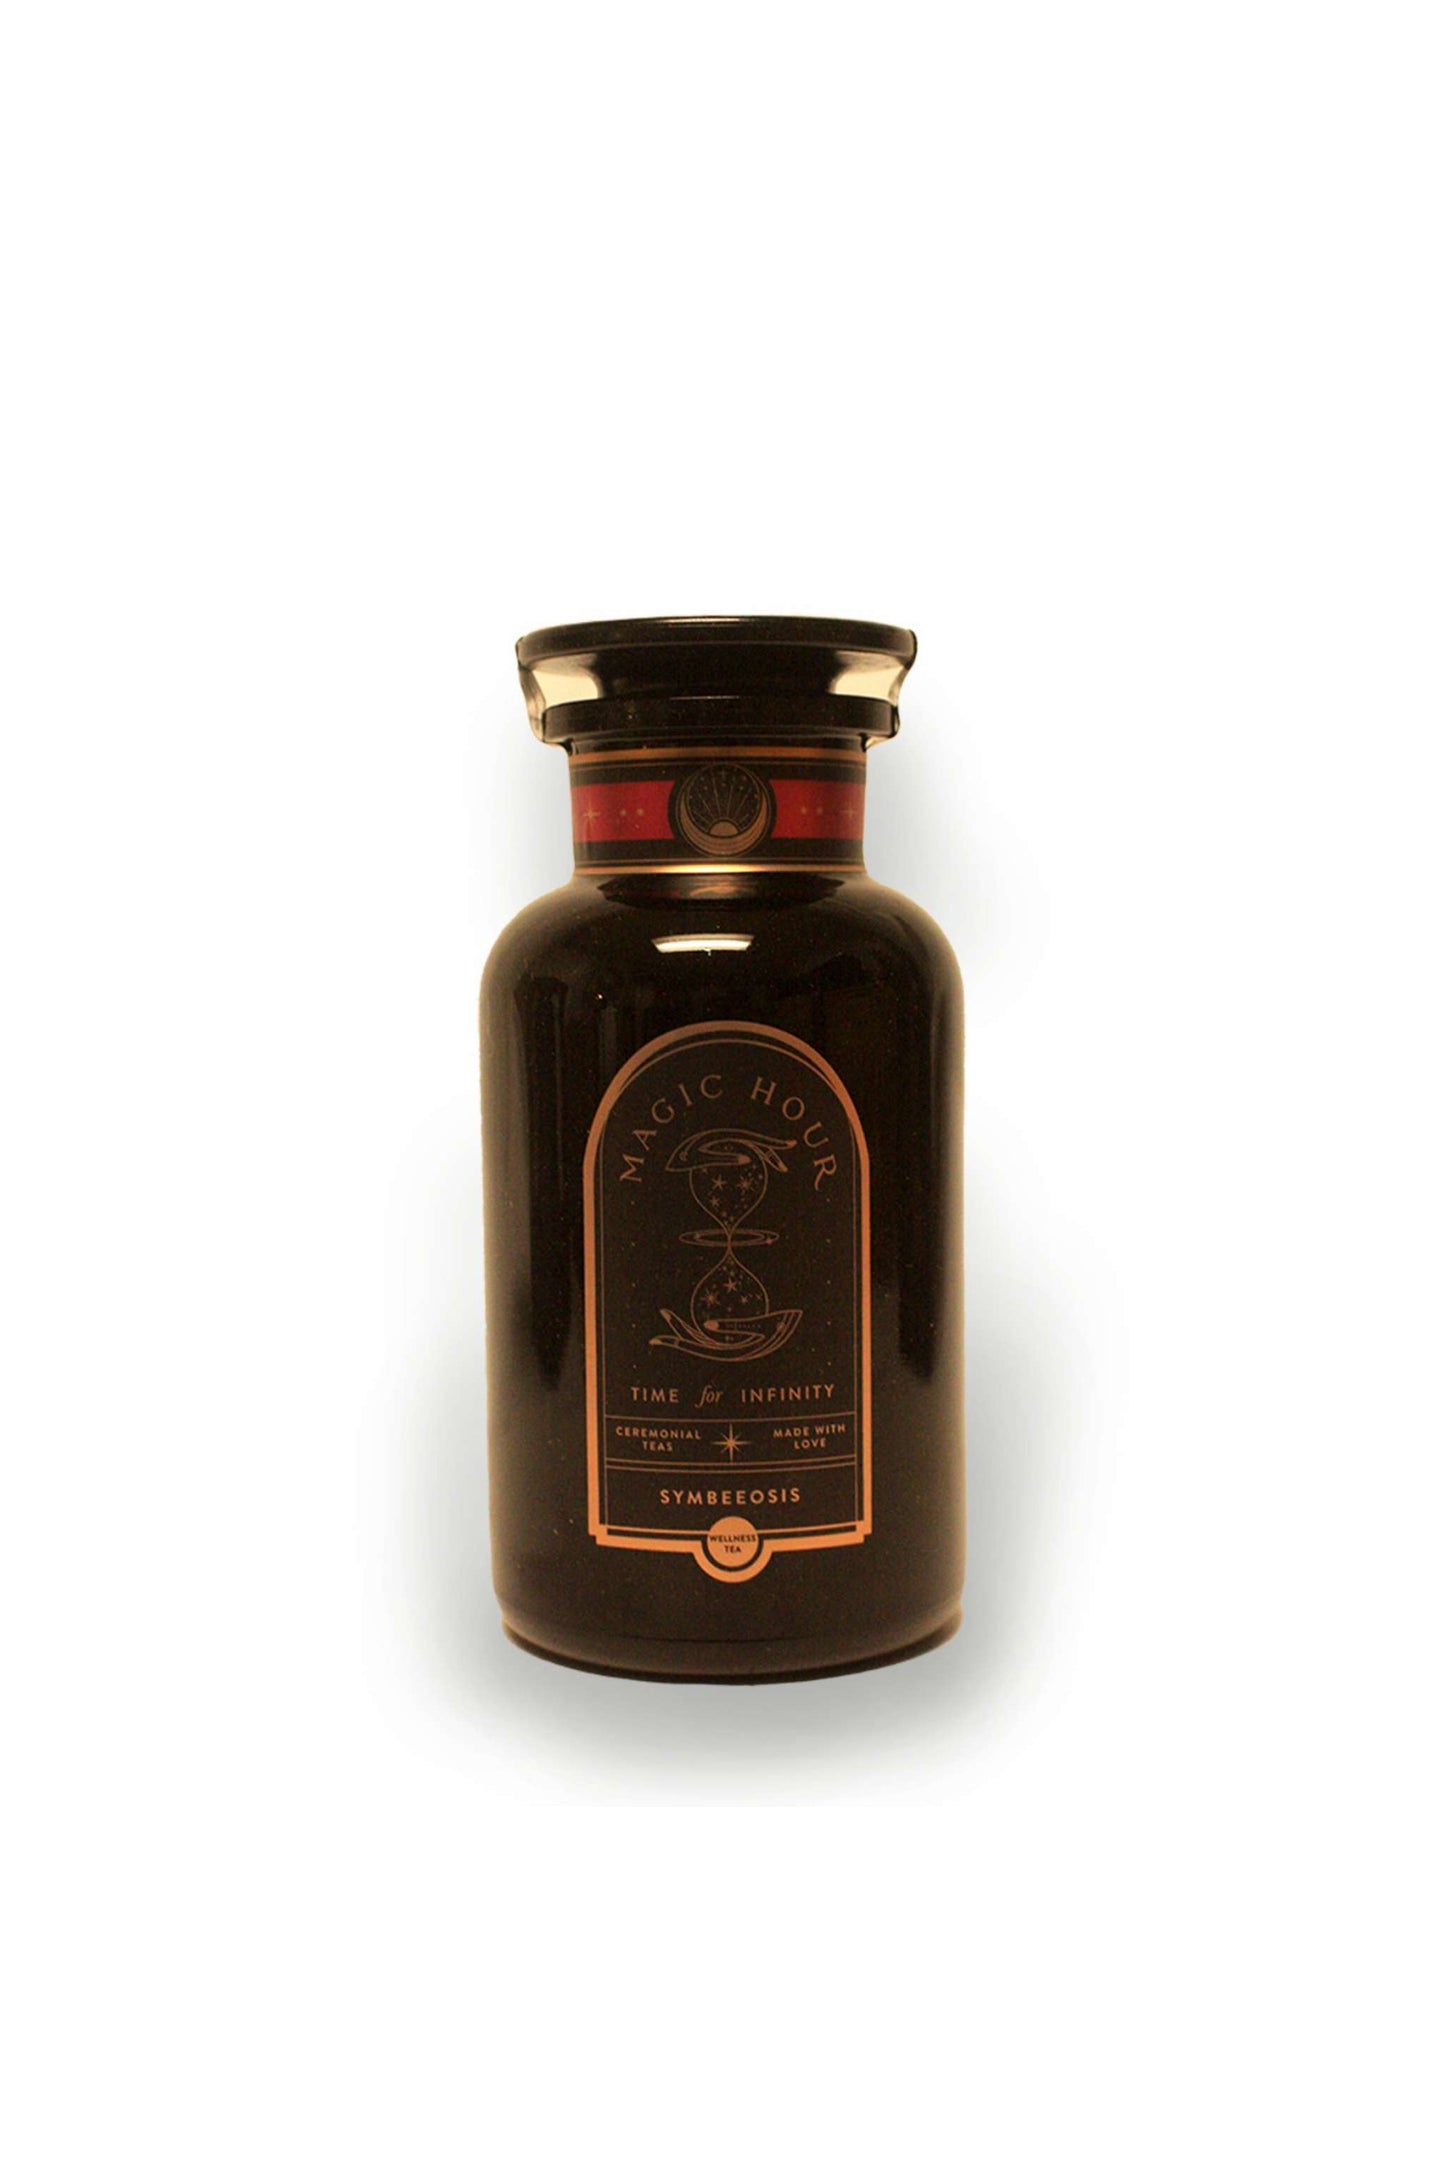 The tea comes in an exquisite violet glass bottle designed to keep the tea fresh studio image